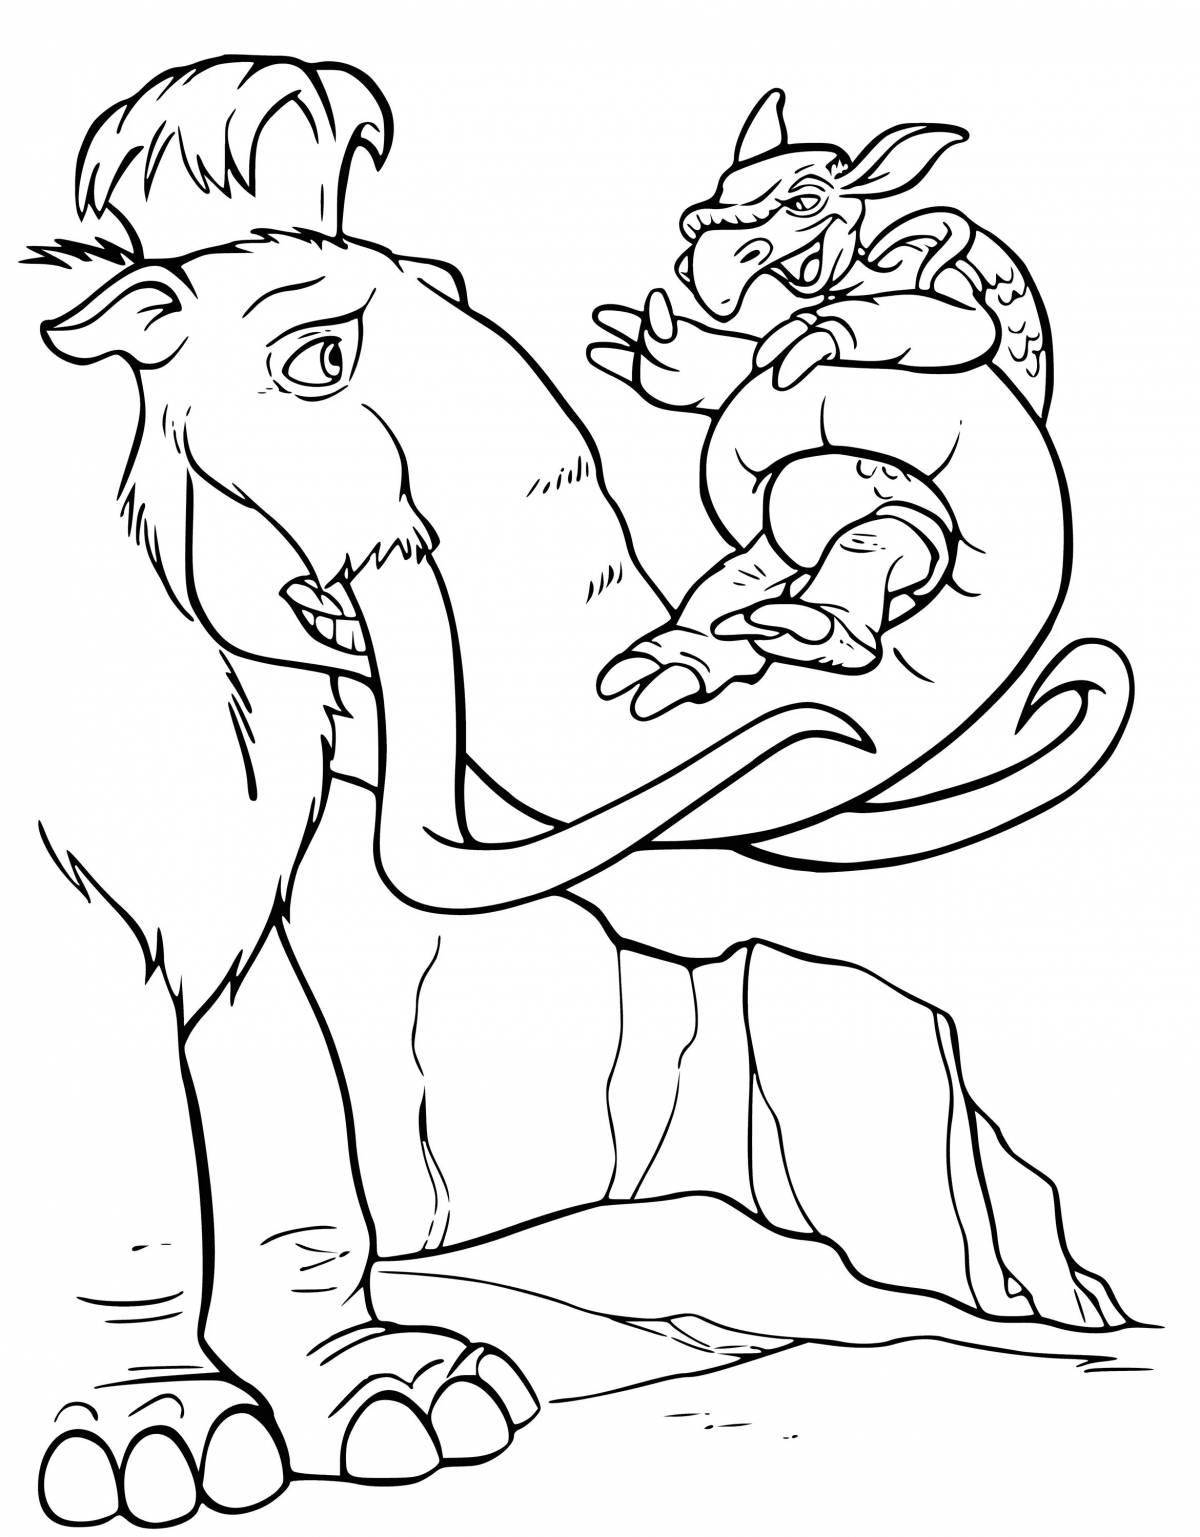 Manny's happy ice age coloring book